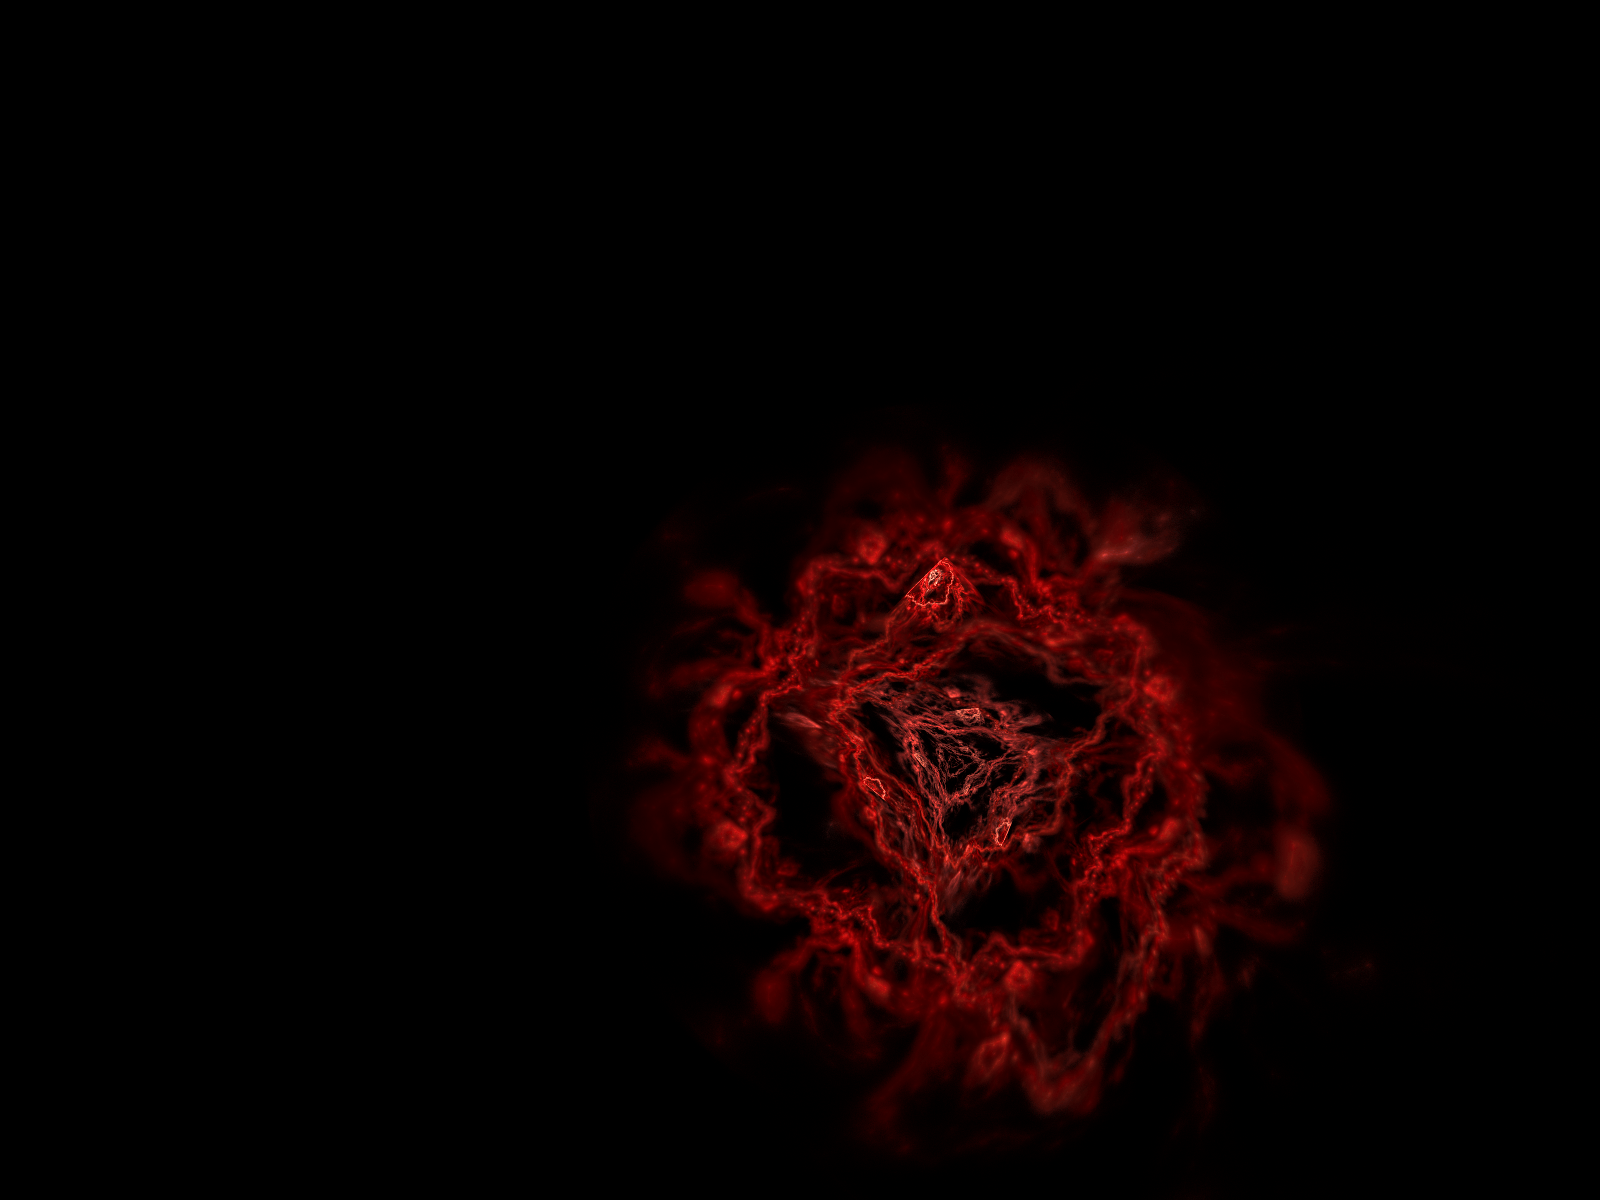 Black And Red Roses Wallpaper